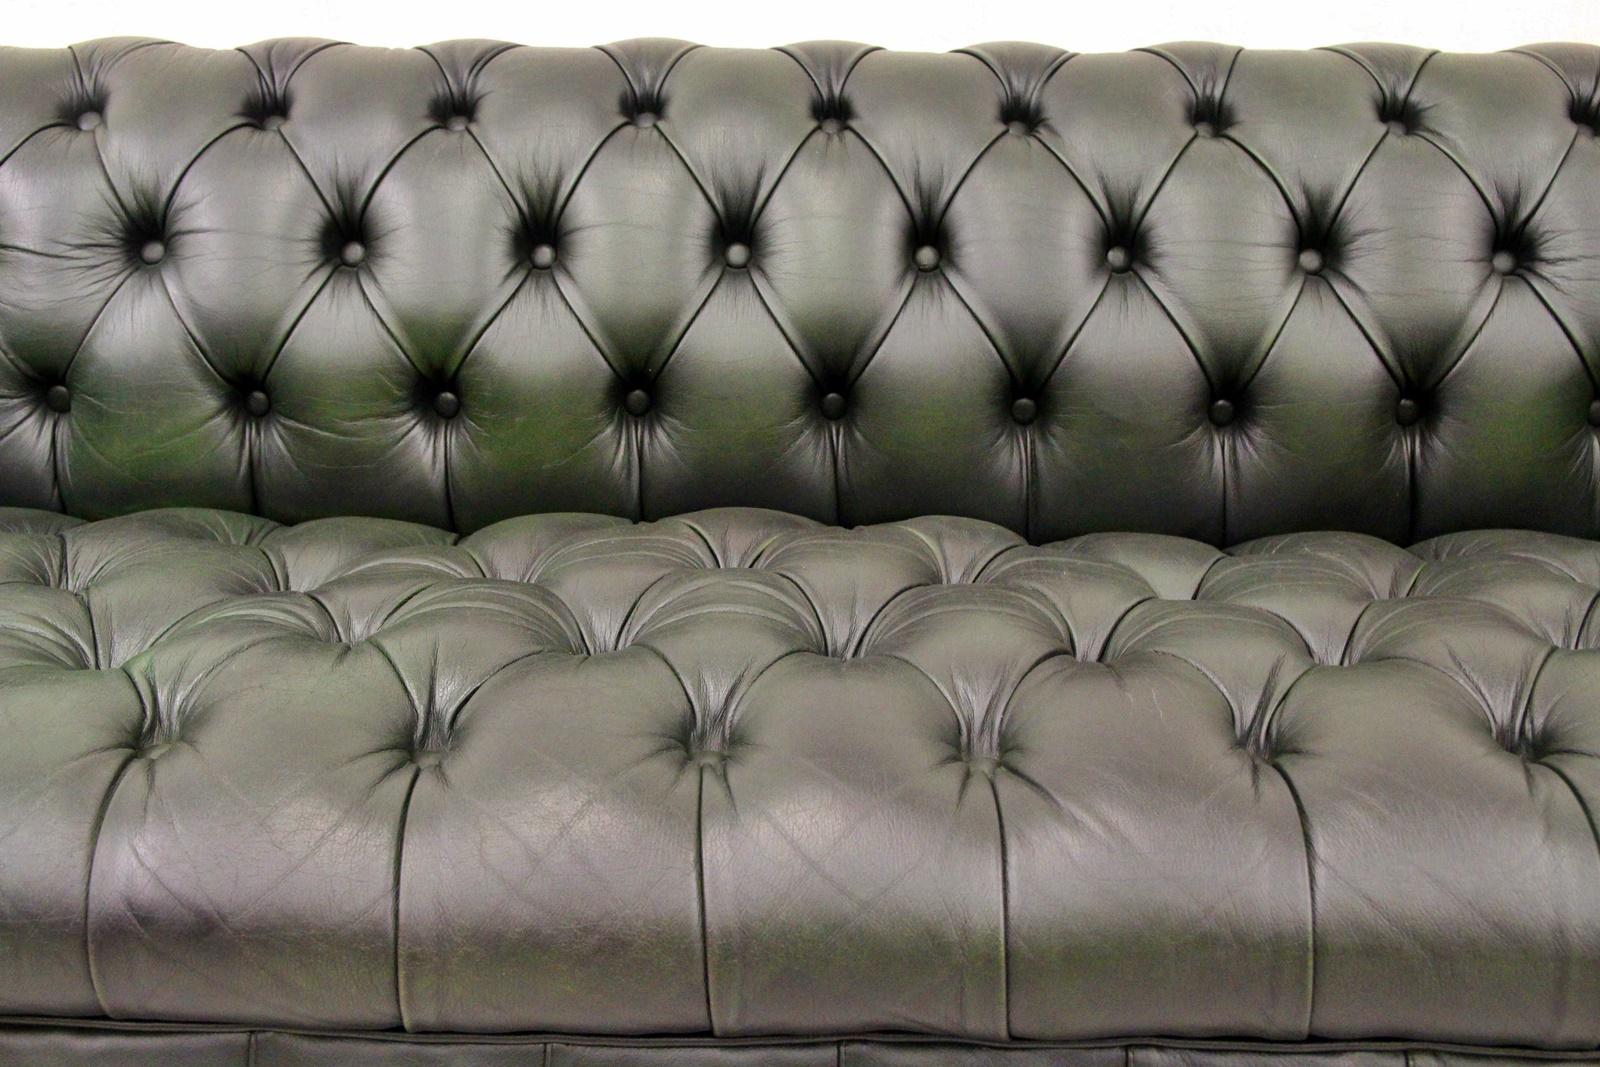 Chesterfield real leather threesome sofa
in original design.

Condition: The sofa is in a very good condition (Mint condition)
sofa
Measures: Height x 73cm, length x 190cm, depth x 85cm
Upholstery is in good condition with patina (see